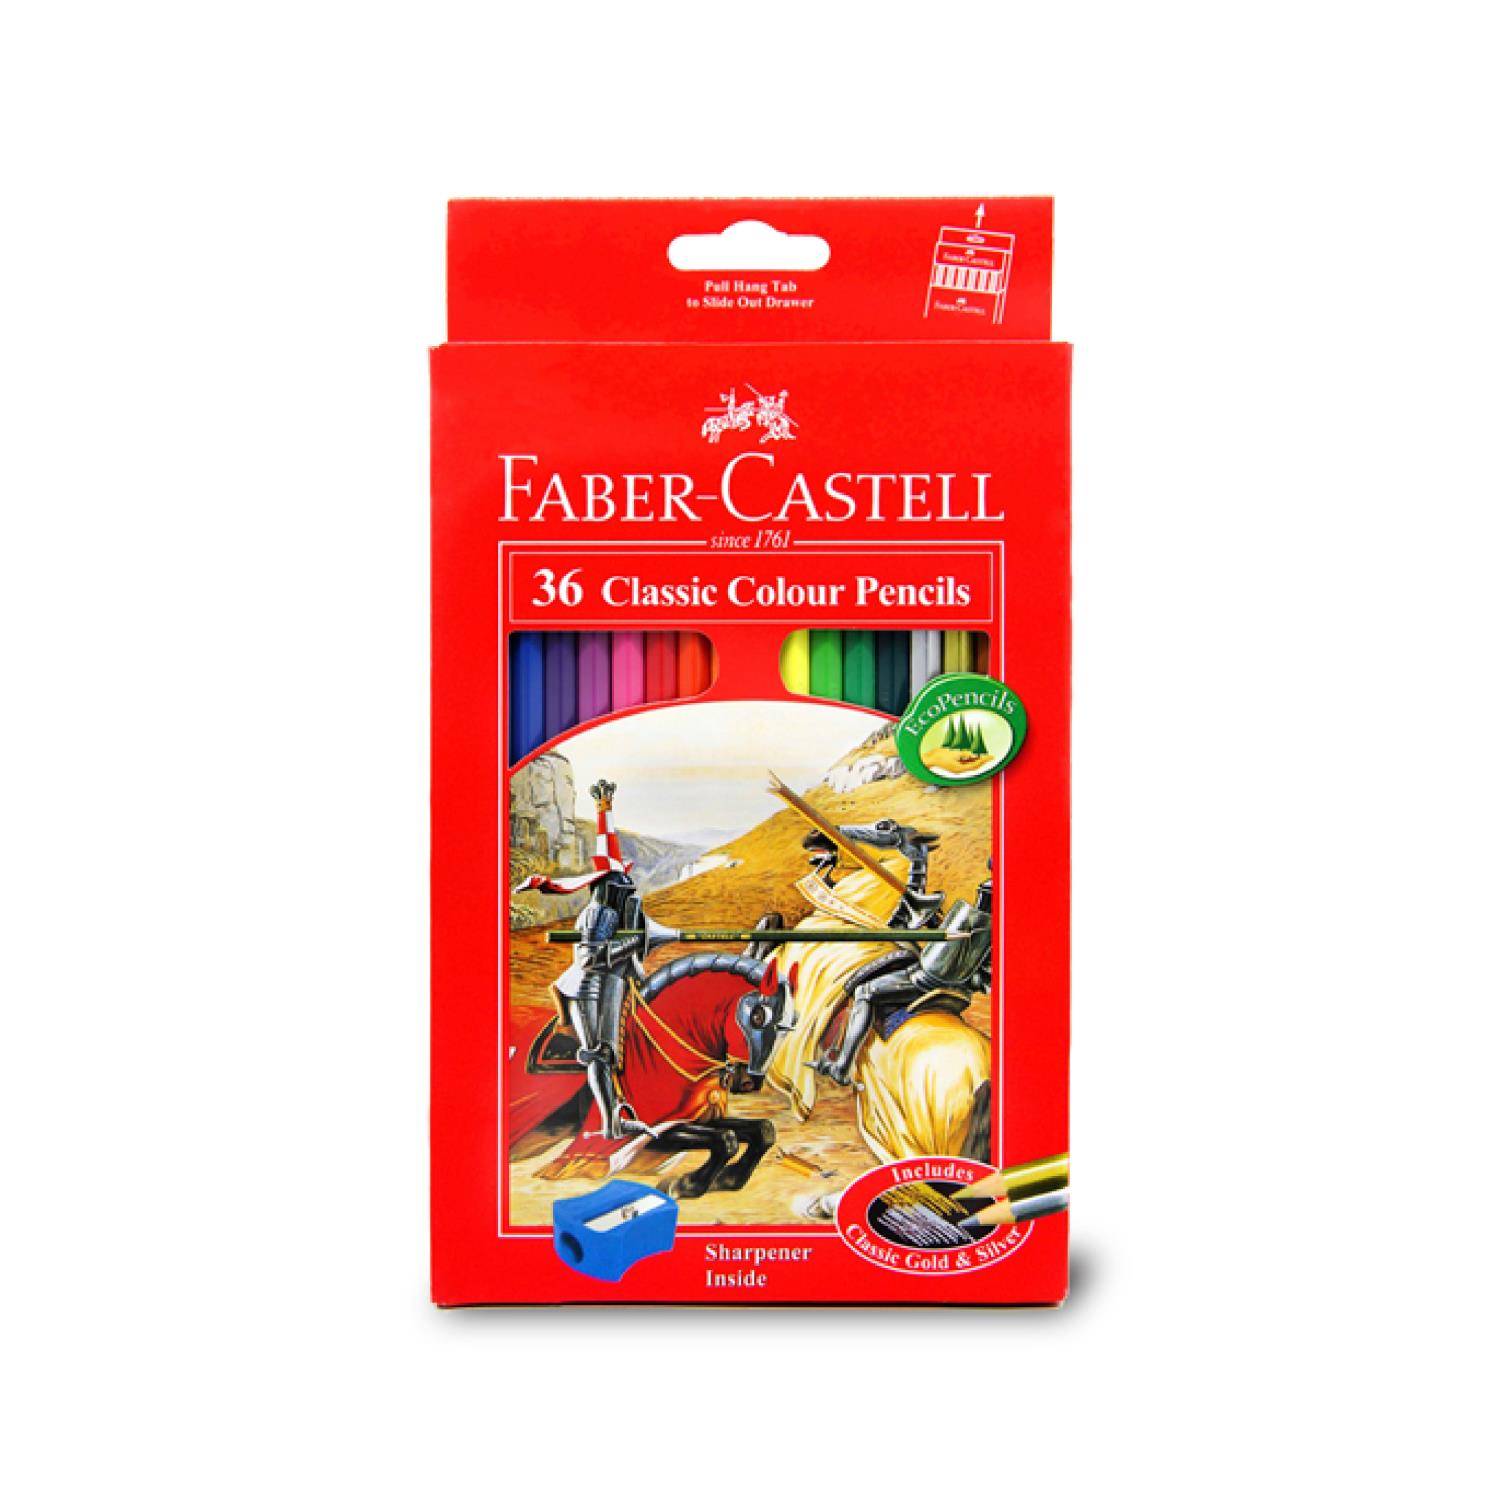 Classic Fargeblyant 36stk, pappetui - Faber-Castell